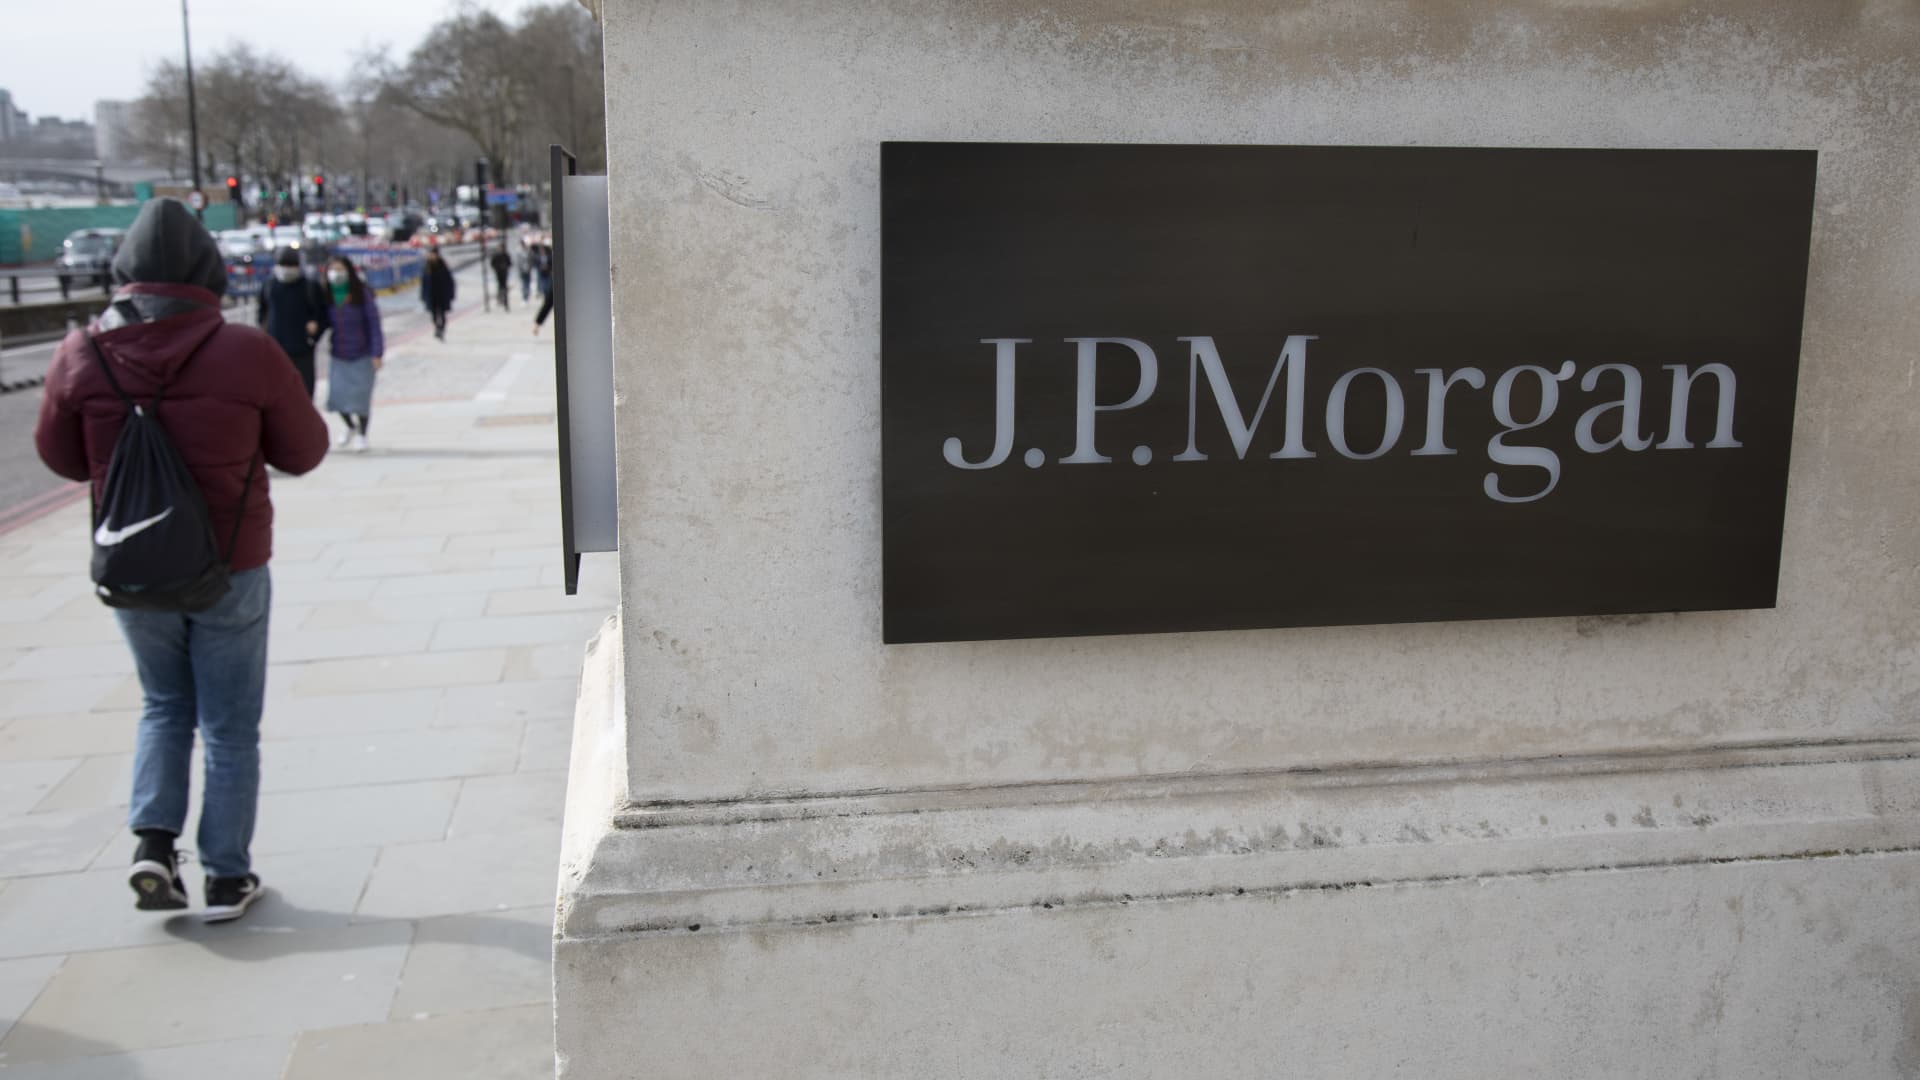 JPMorgan says Chinese language assets are a correct diversifier elegant now